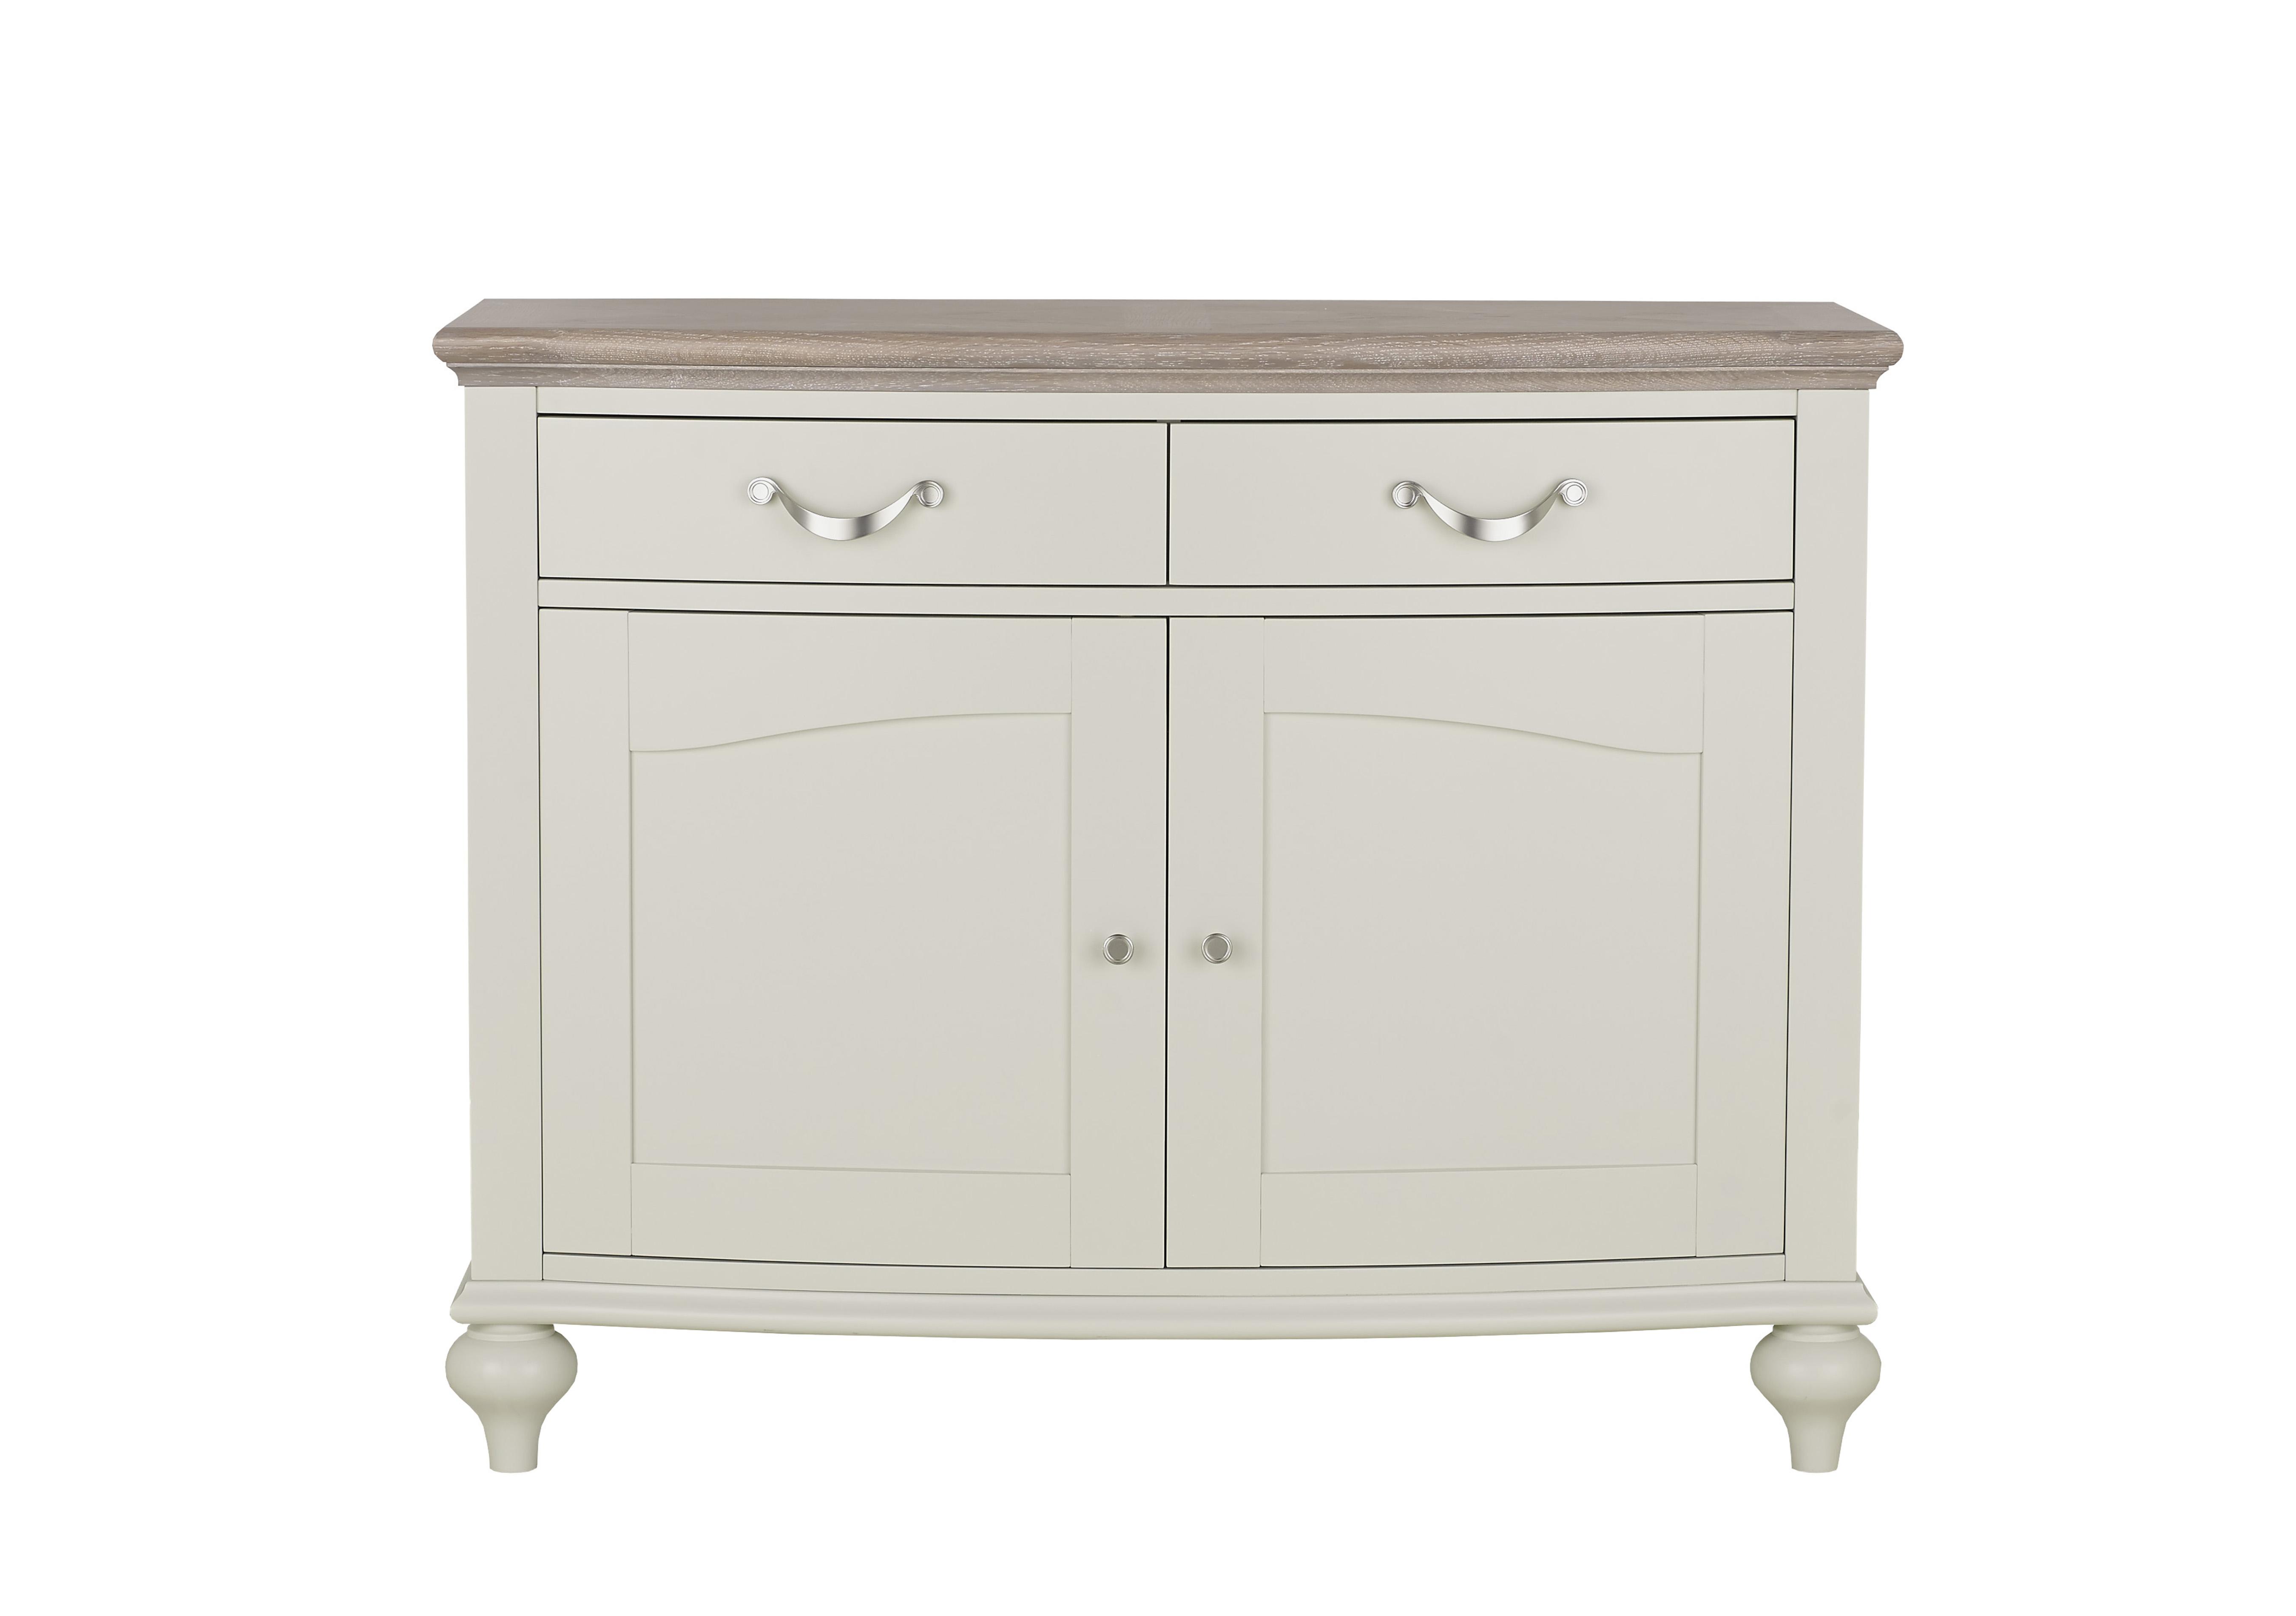 Annecy Narrow Sideboard in Soft Grey Paint on Furniture Village